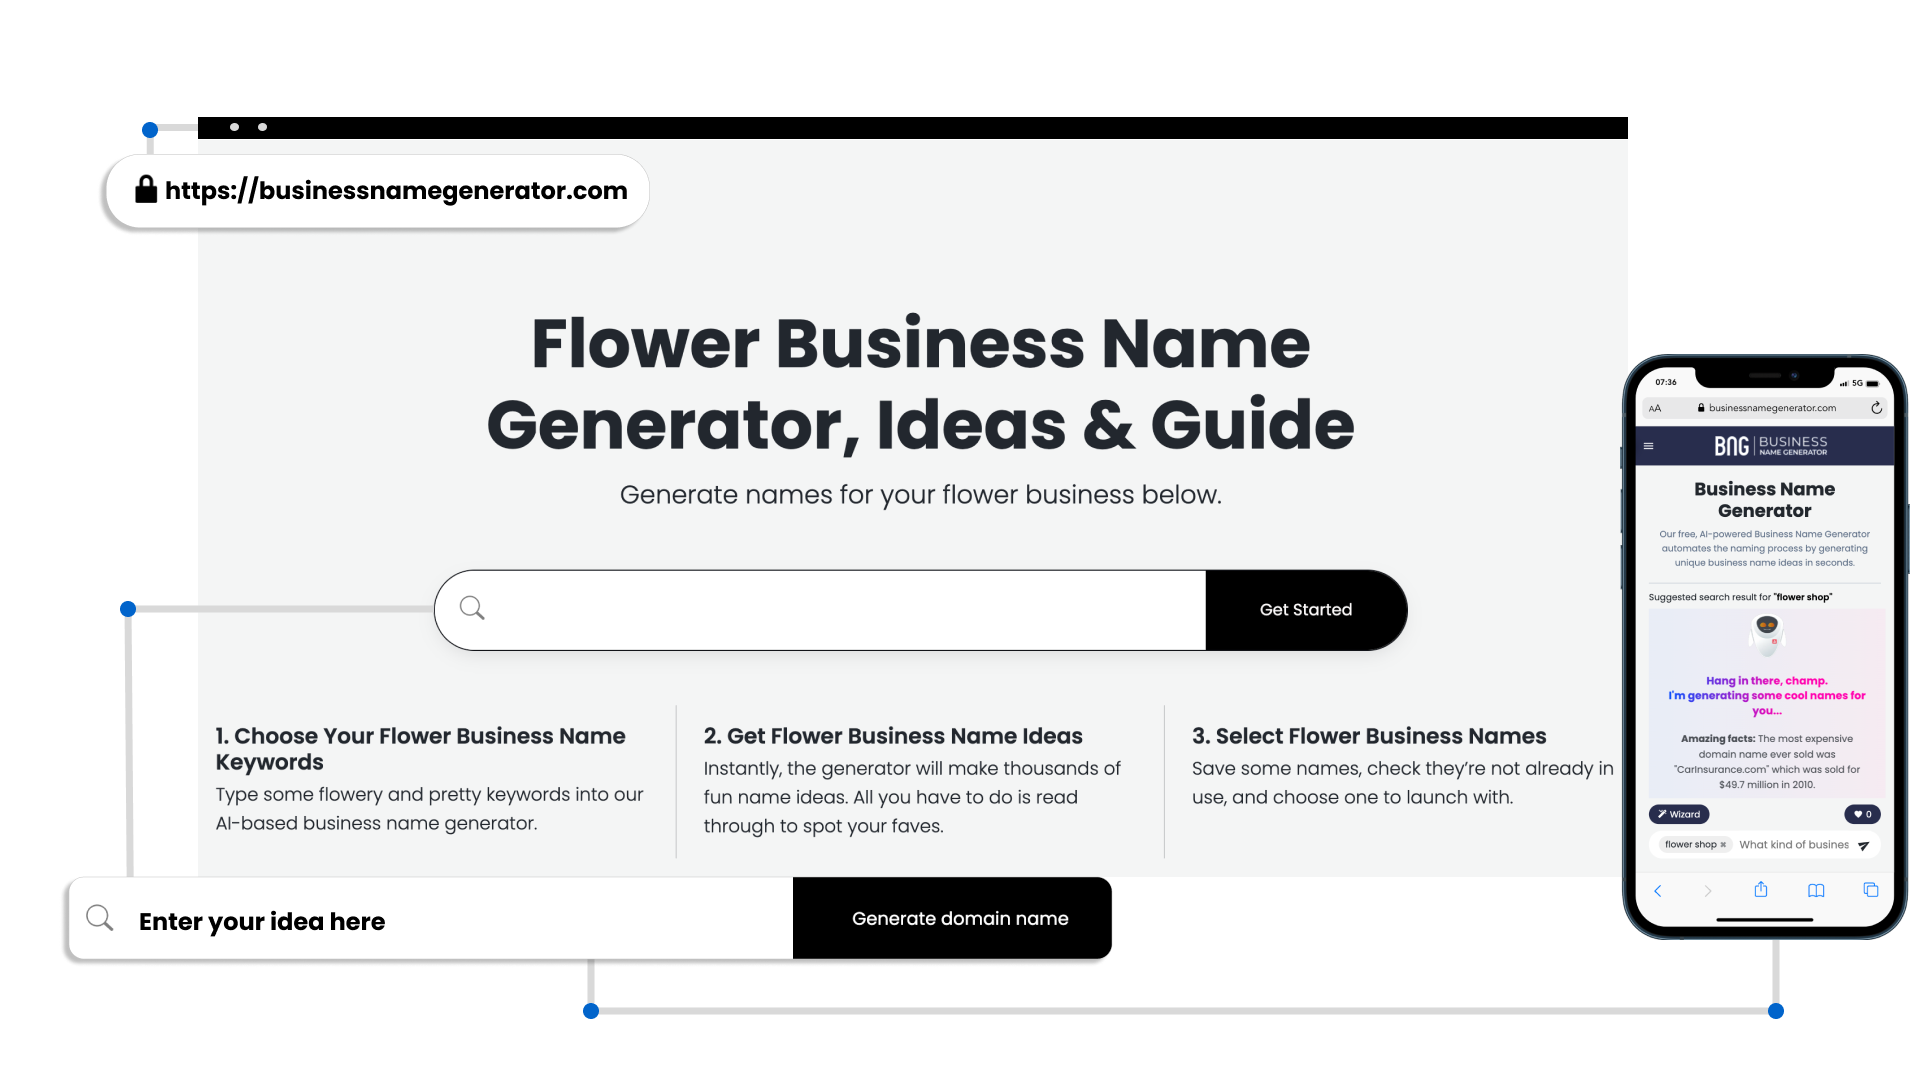 Benefits of Our Flower Business Name Generator